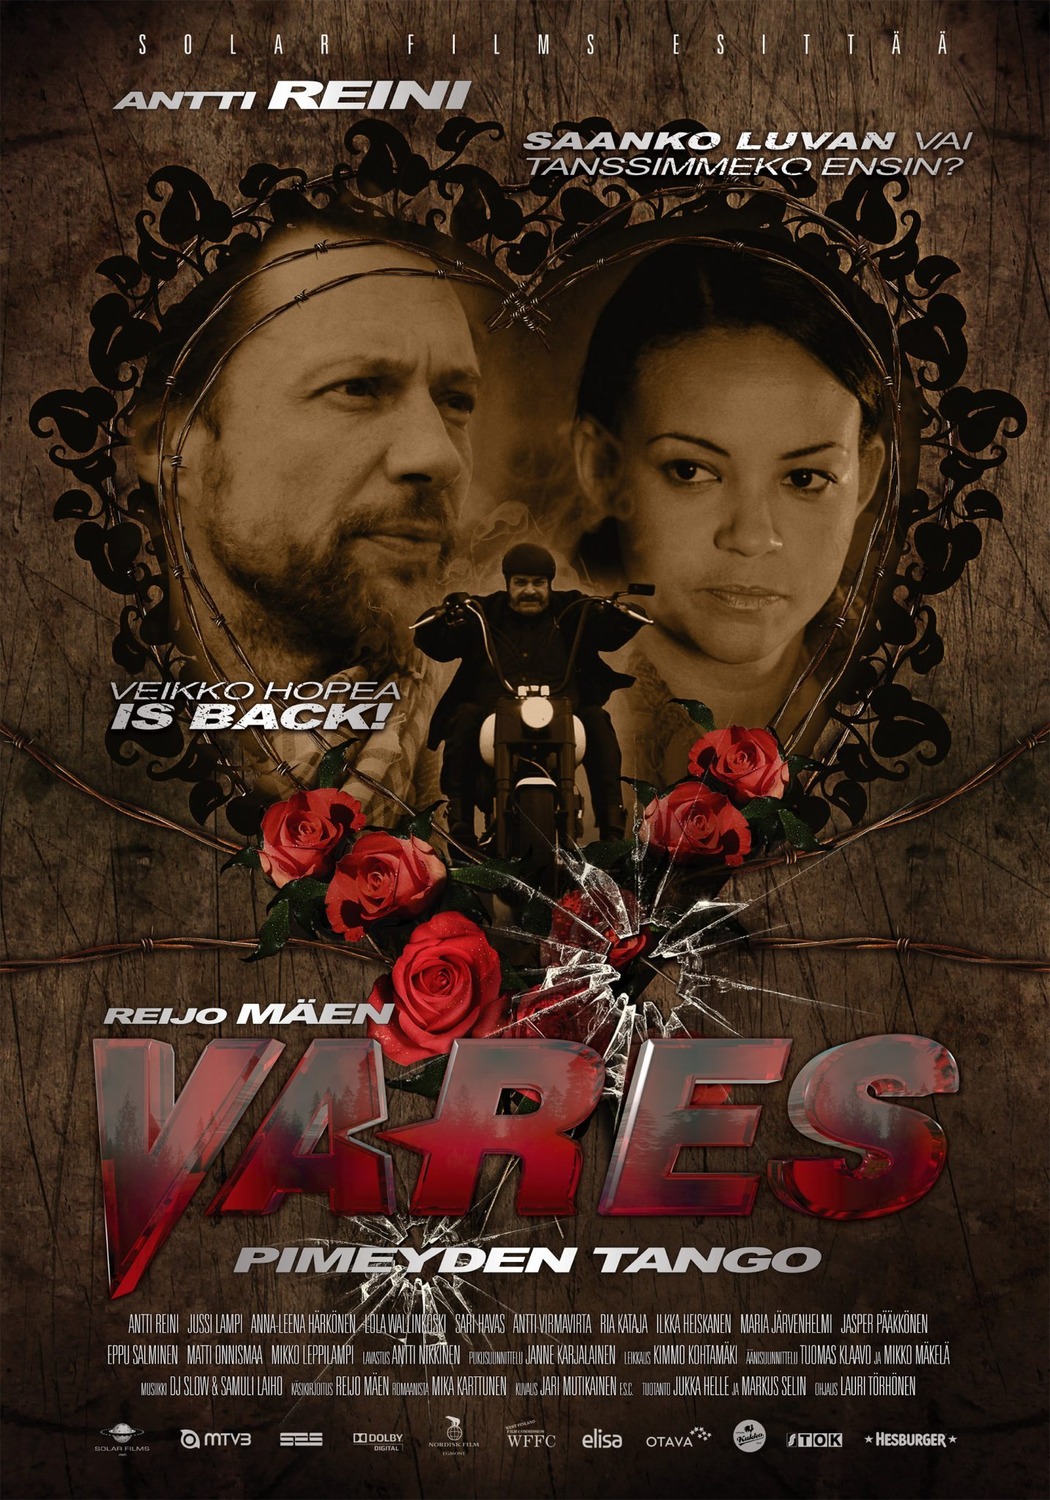 Extra Large Movie Poster Image for Vares - Pimeyden tango 